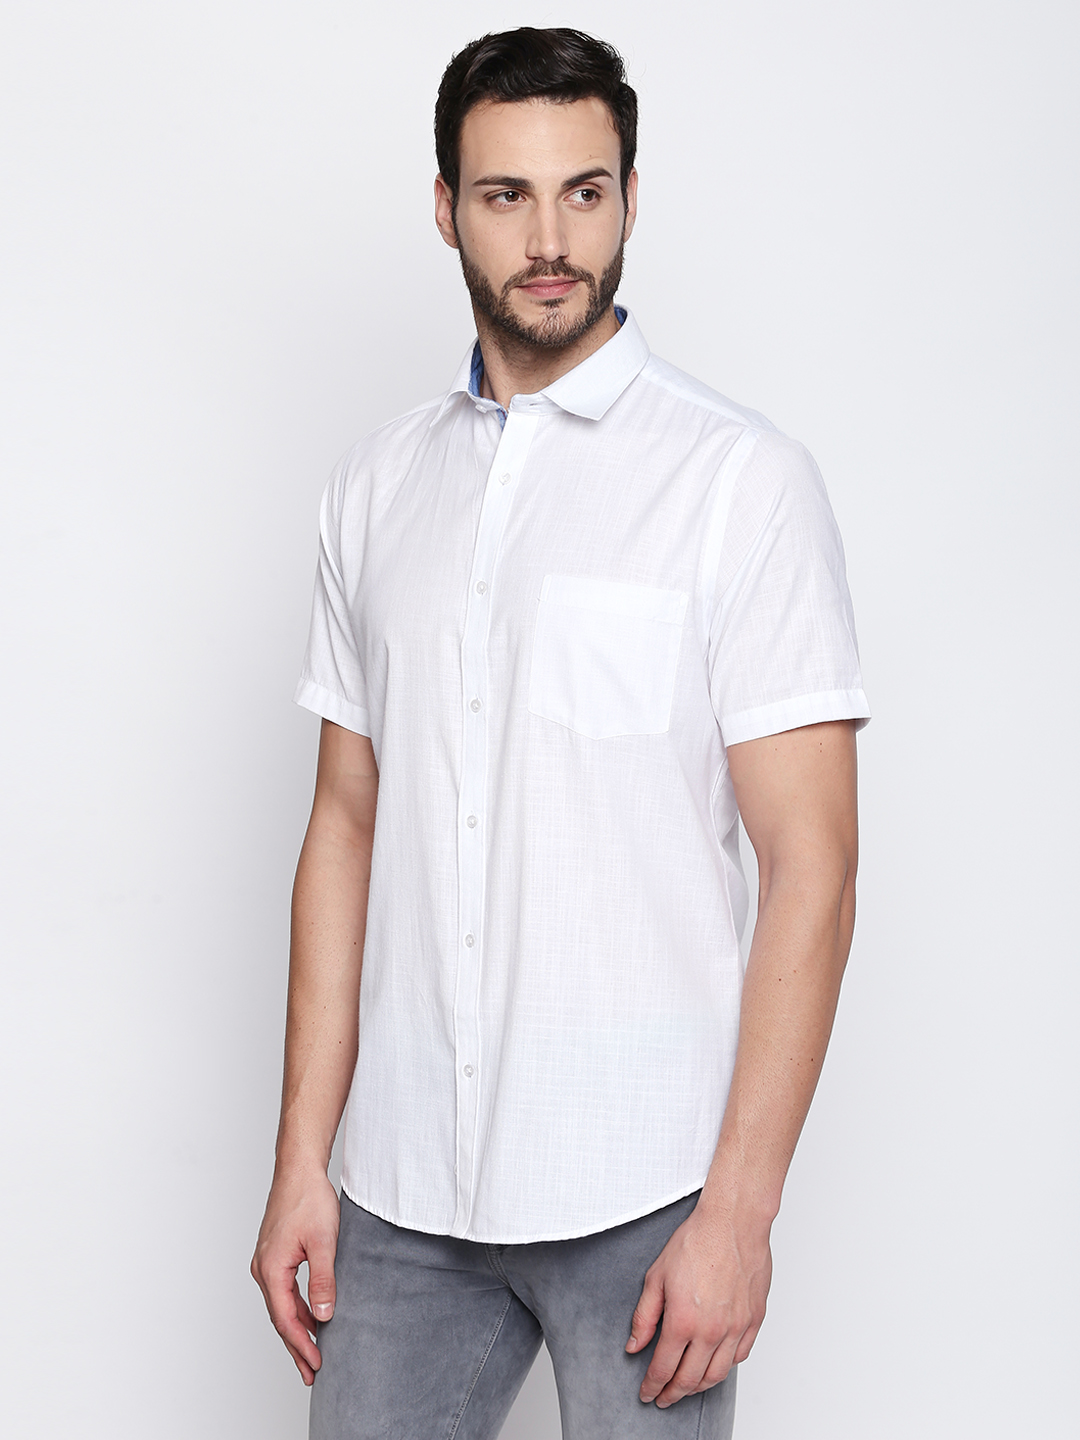 Buy Solemio 100% Cotton Shirt For Mens Online @ ₹598 from ShopClues